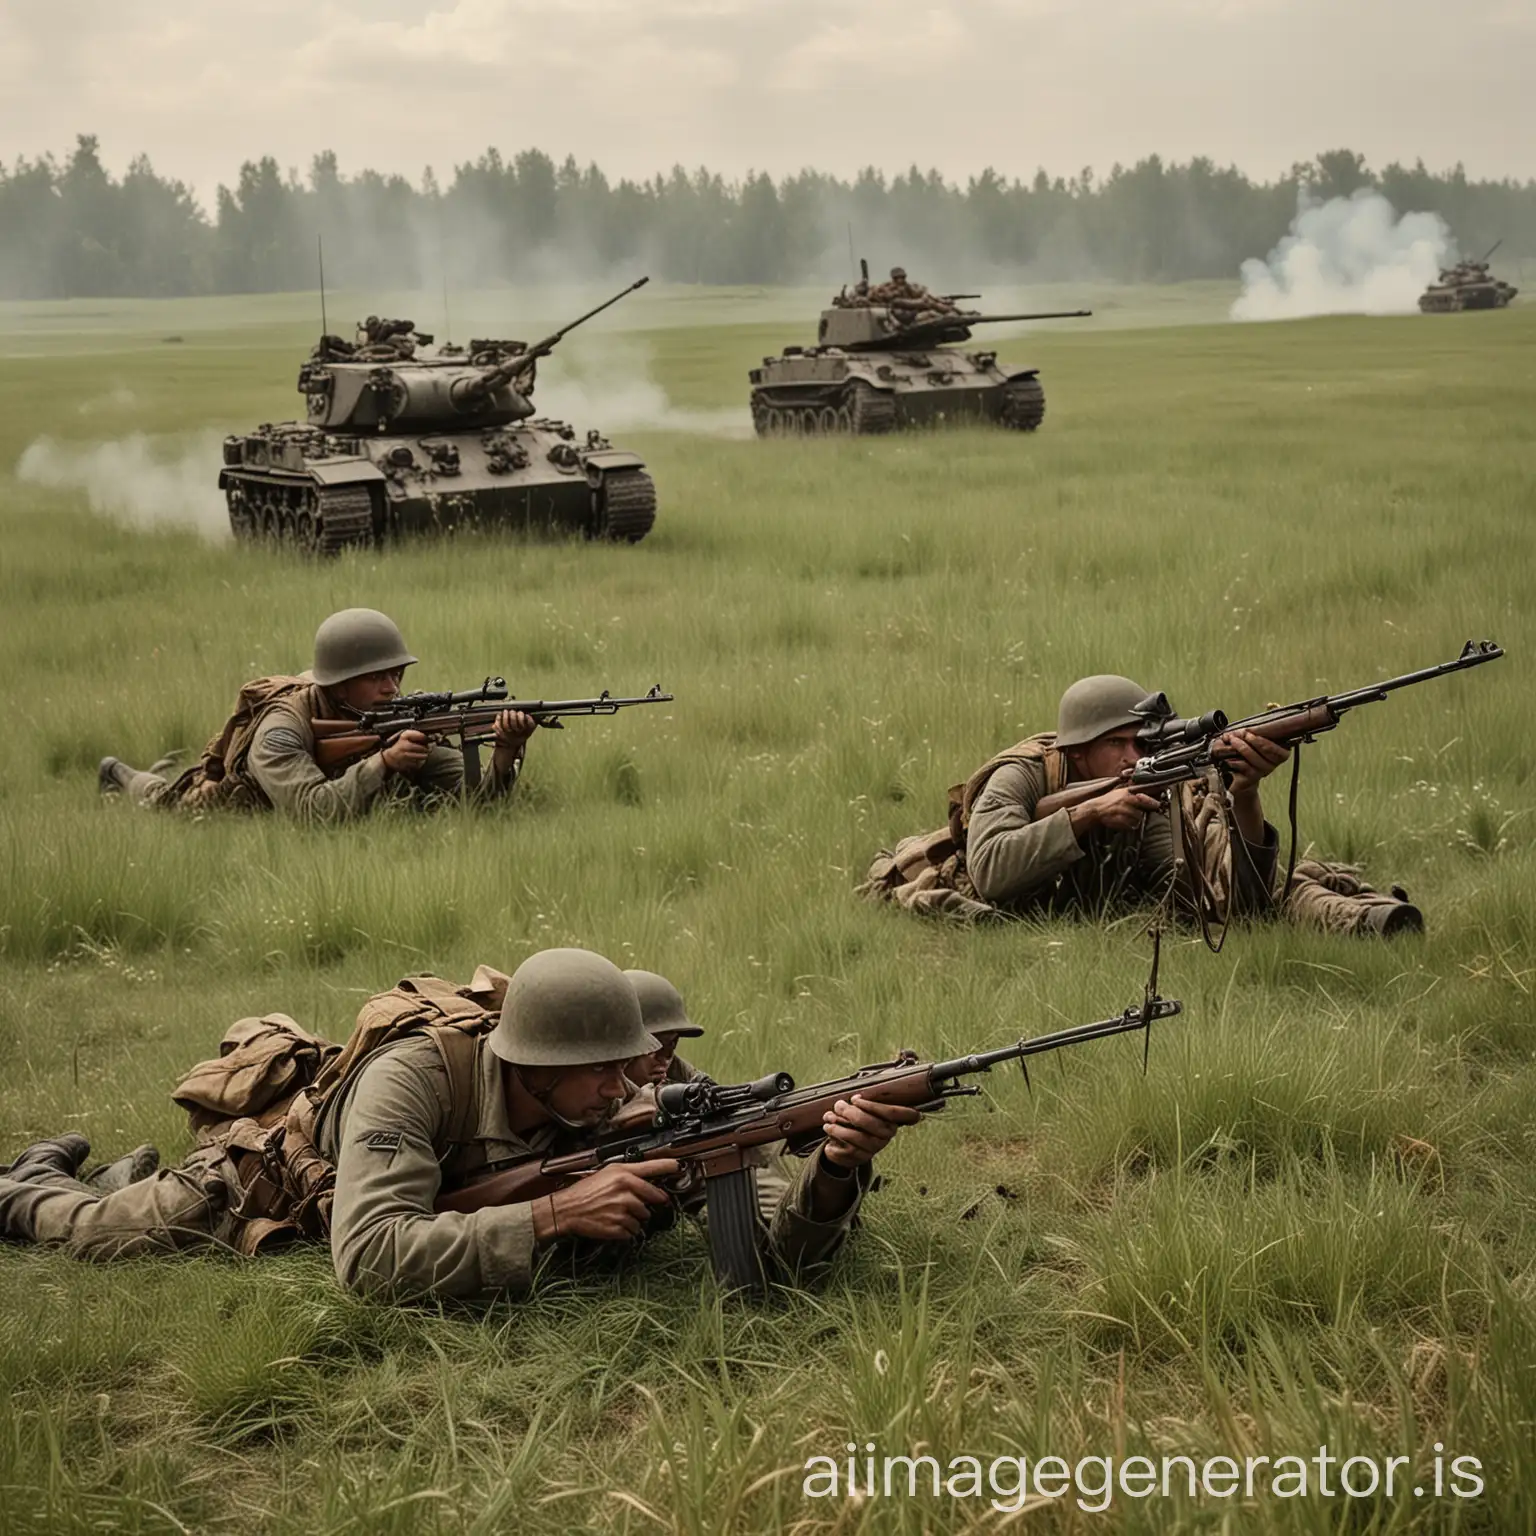 Field of grass with four highly-armed American soldiers laying down and aiming their rifles at a Russian and German tank